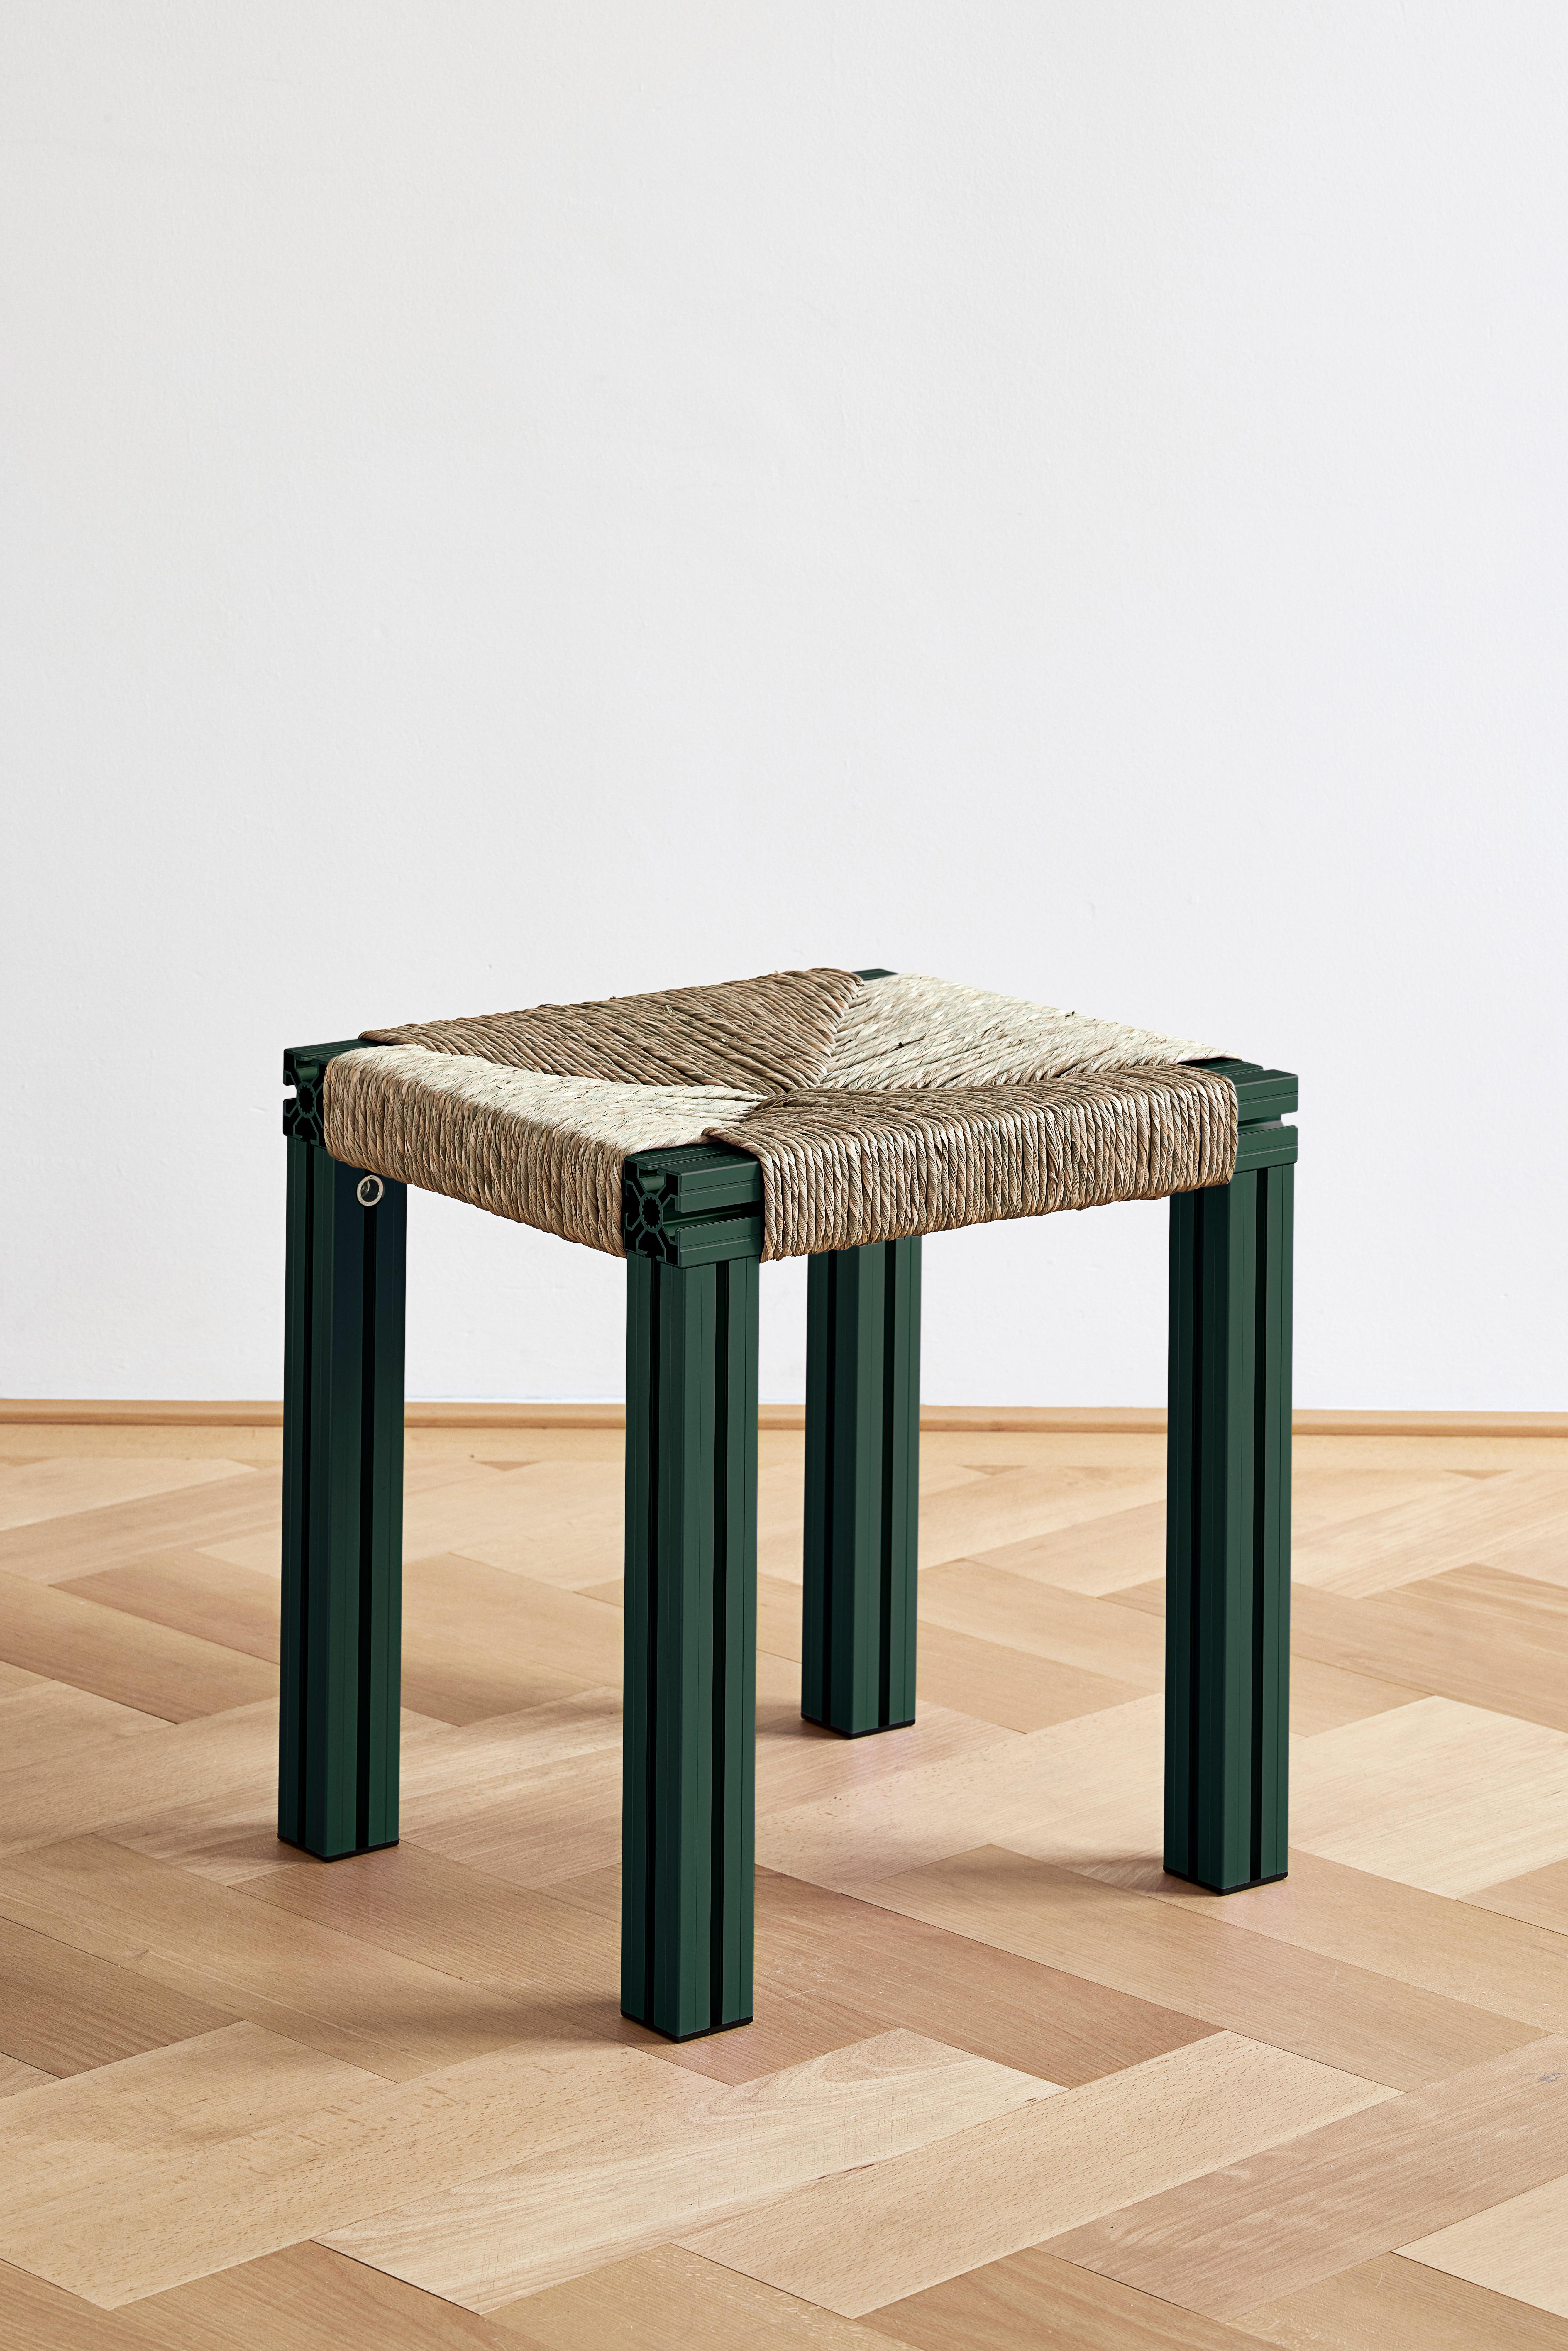 Modern Green Aluminium Stool with Reel Rush Seating from Anodised Wicker Collection For Sale